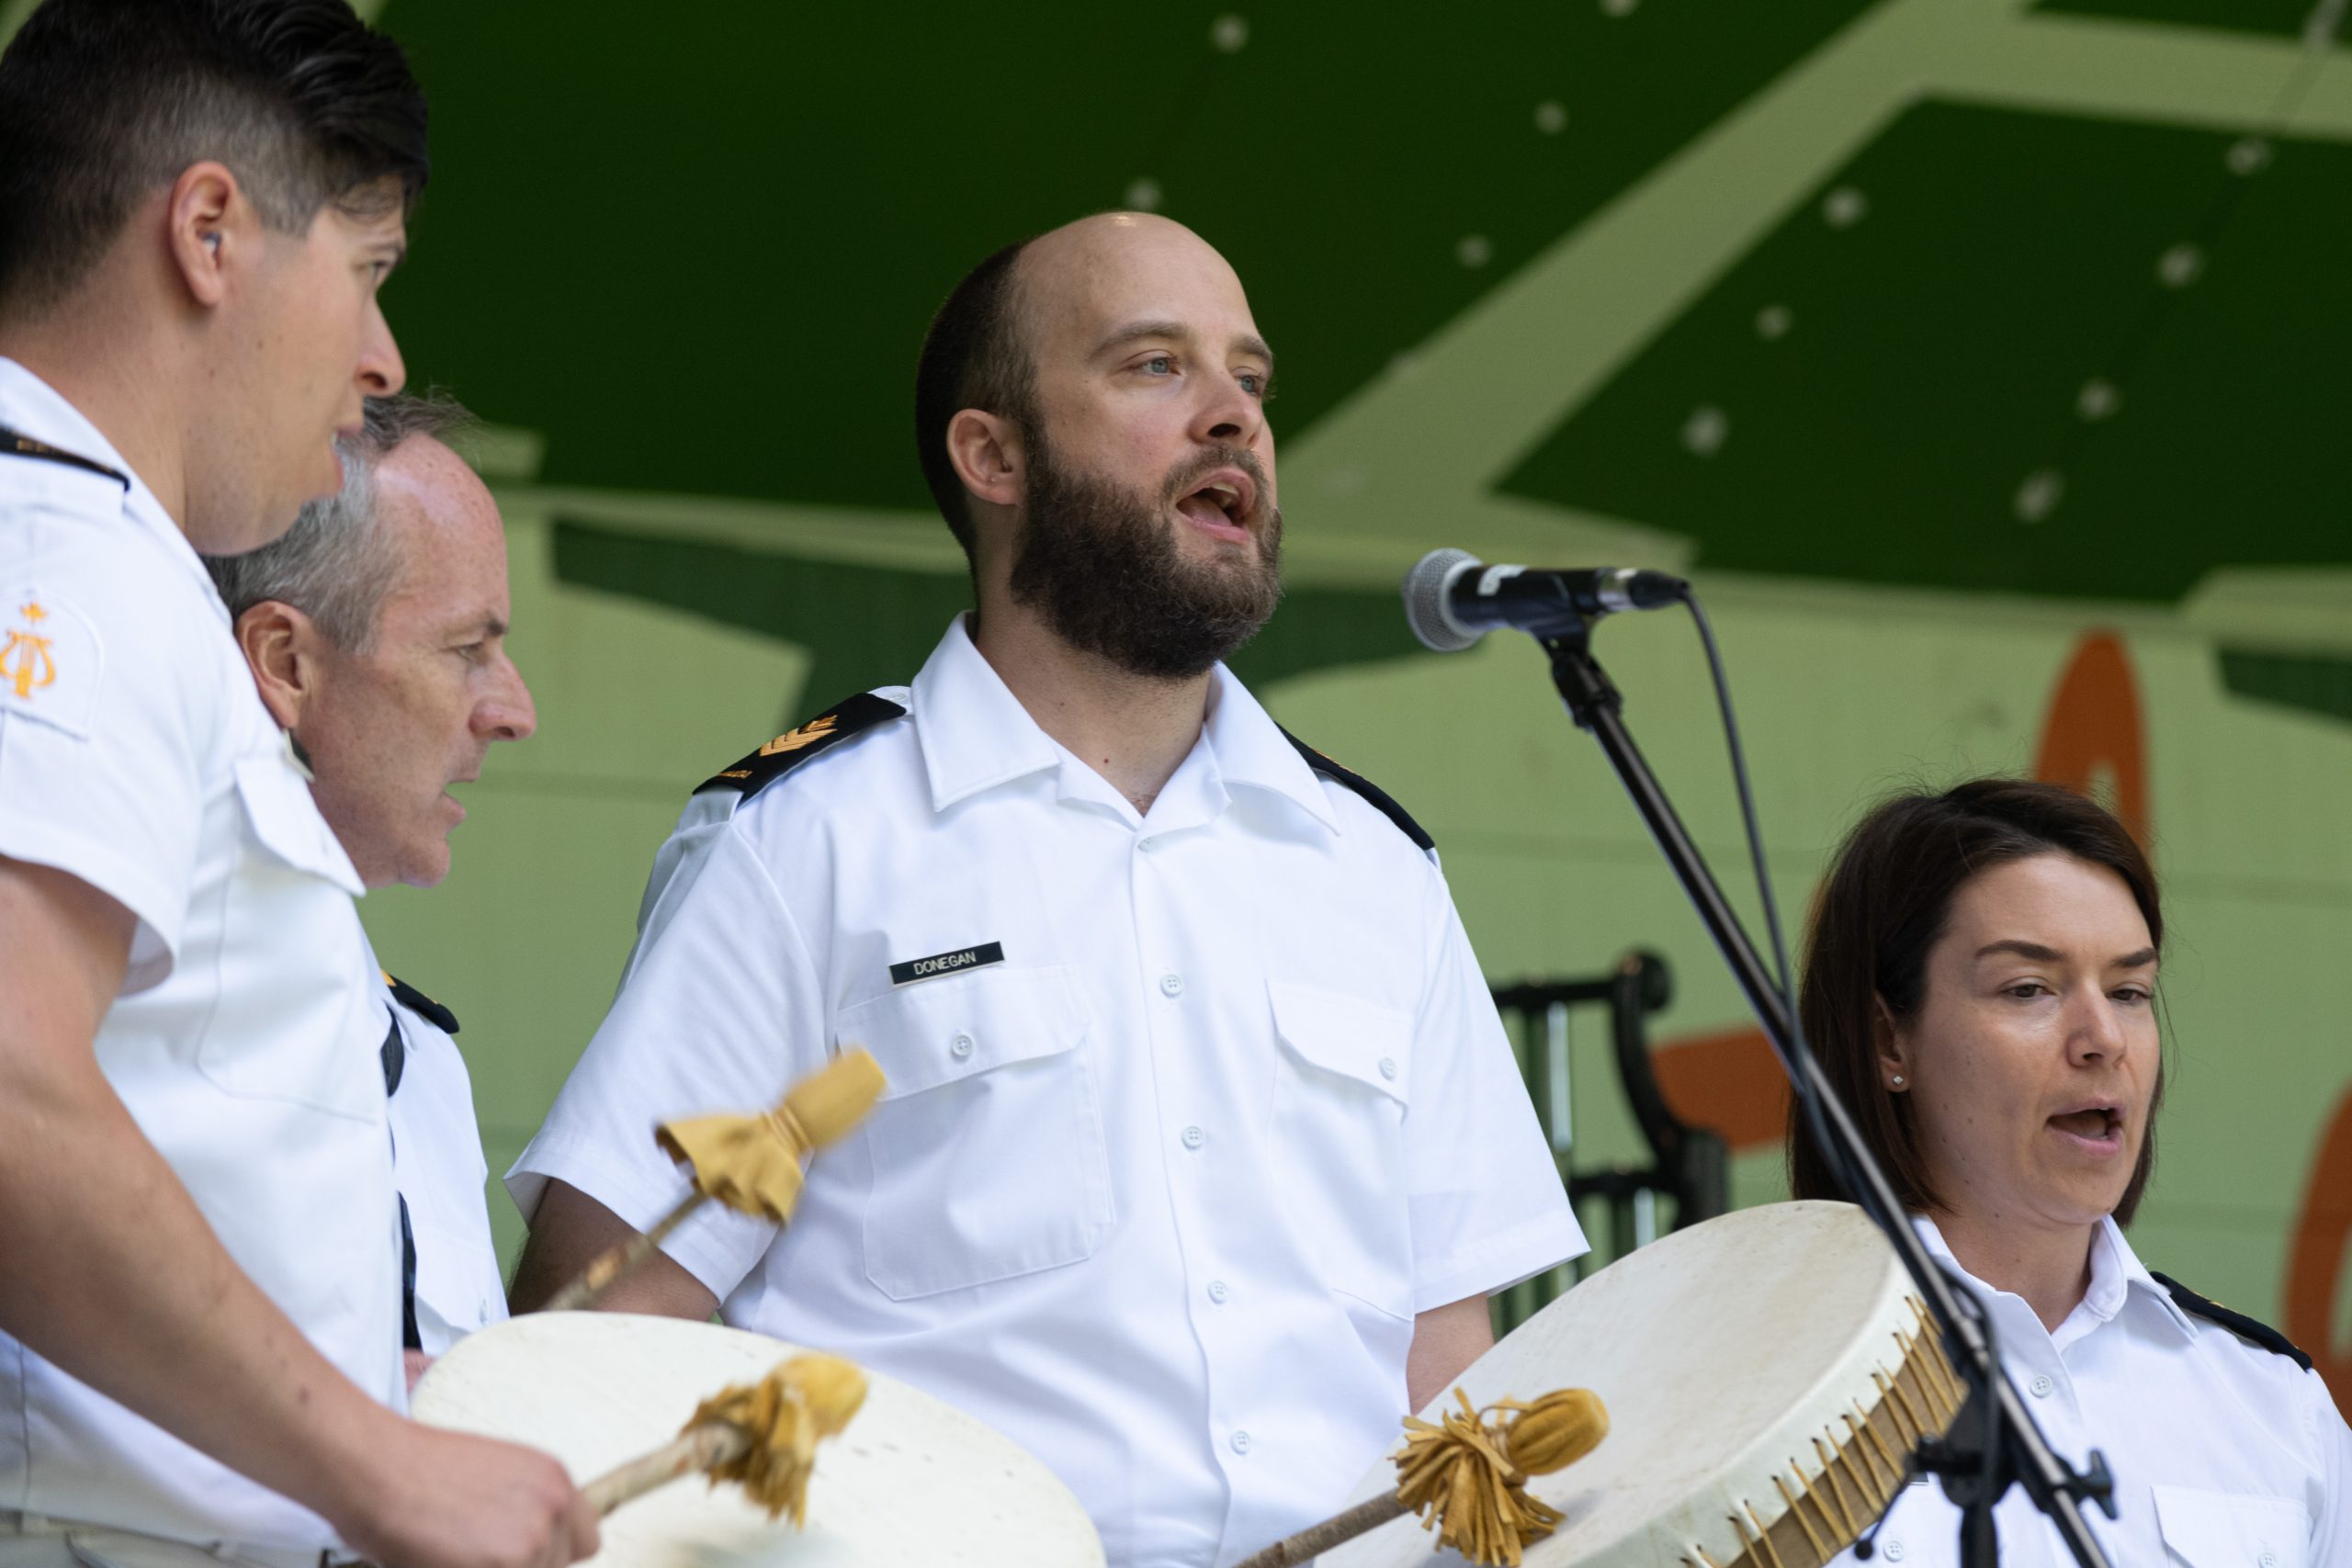 Members of the Naden Band of the Royal Canadian Navy perform for their summer concert.